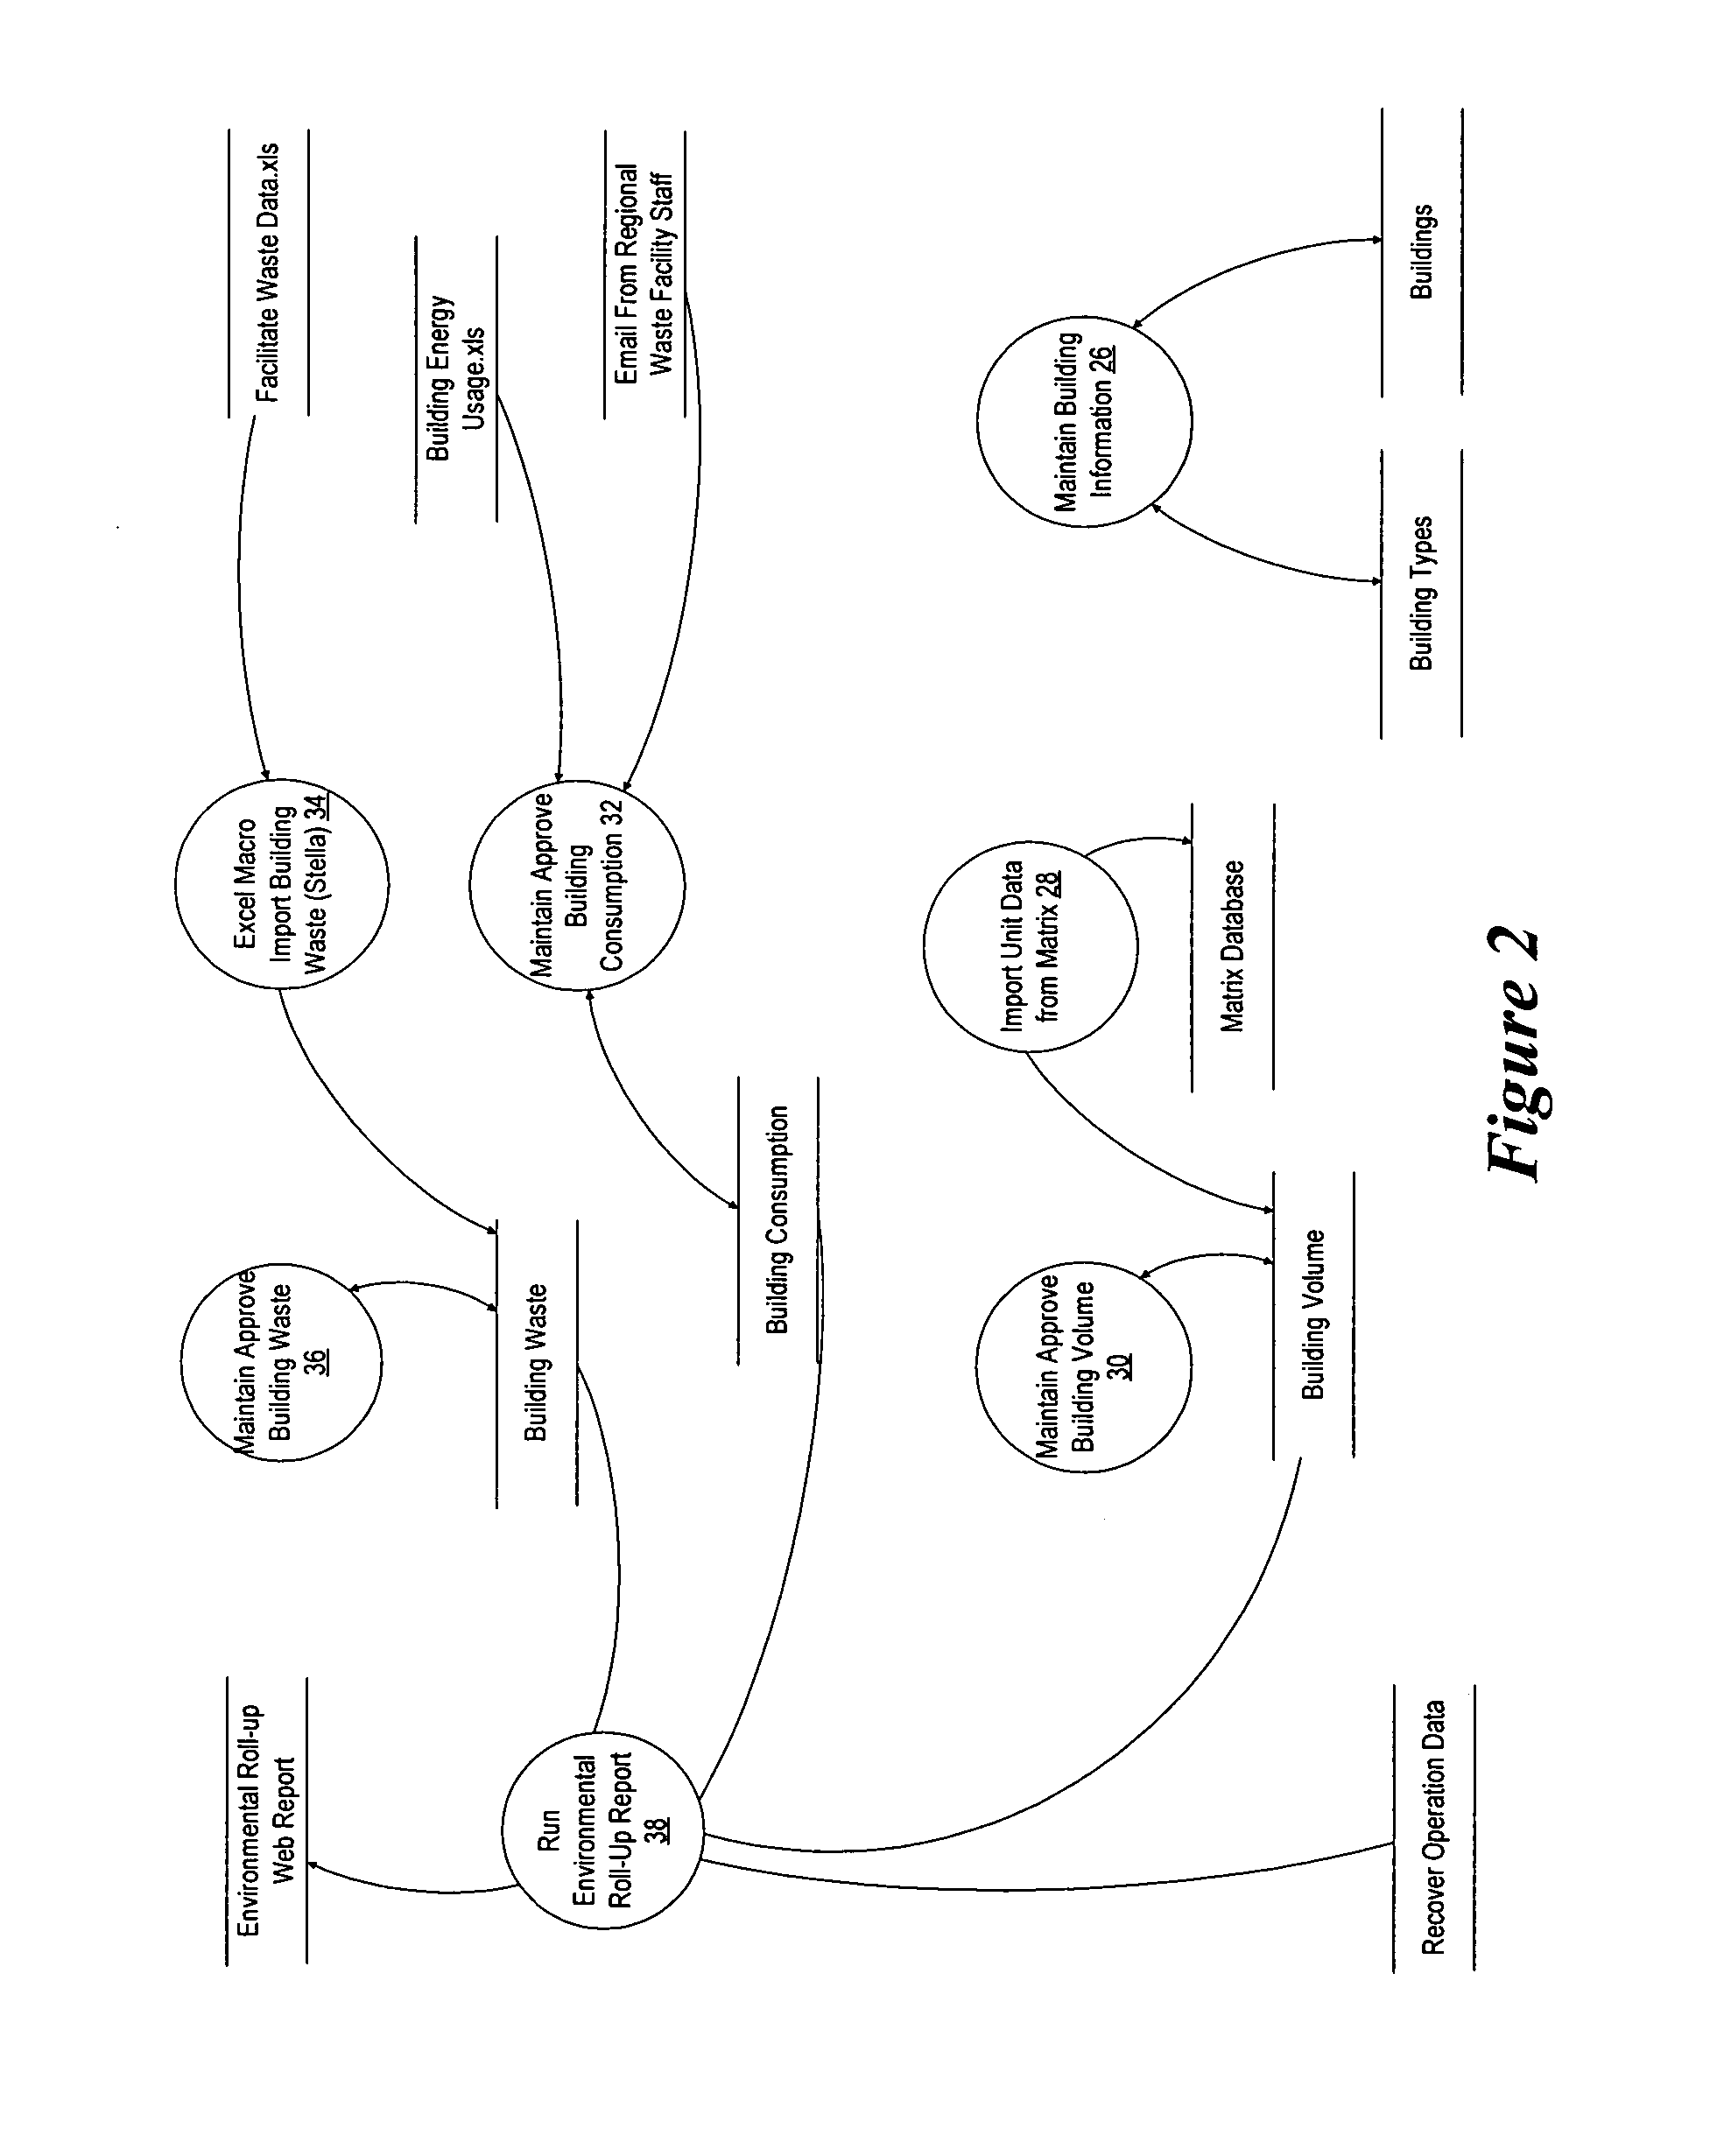 System and method for managing enterprise environmental impacts